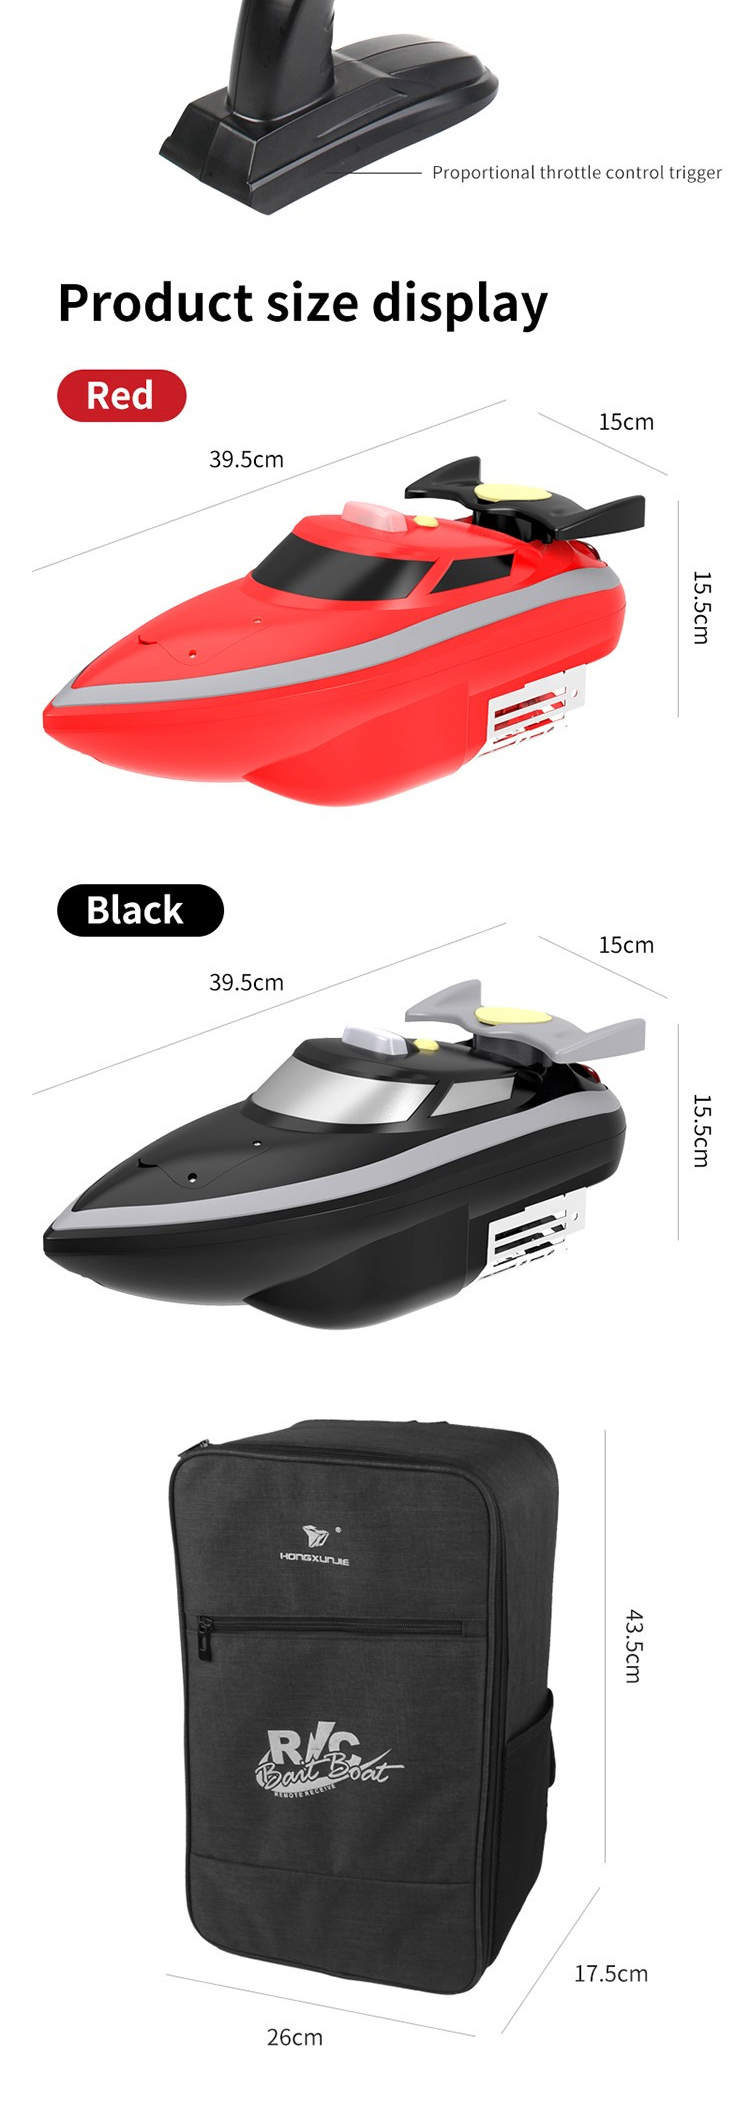 Bulk Buy China Wholesale Samtoy Hot Sale Hj807 Fishing Boat Remote Control  Rc Boat For Pools And Lakes High Speed Electric Rc Racing Boats Toy $57.99  from Sam Toys Industrial Co., Ltd.